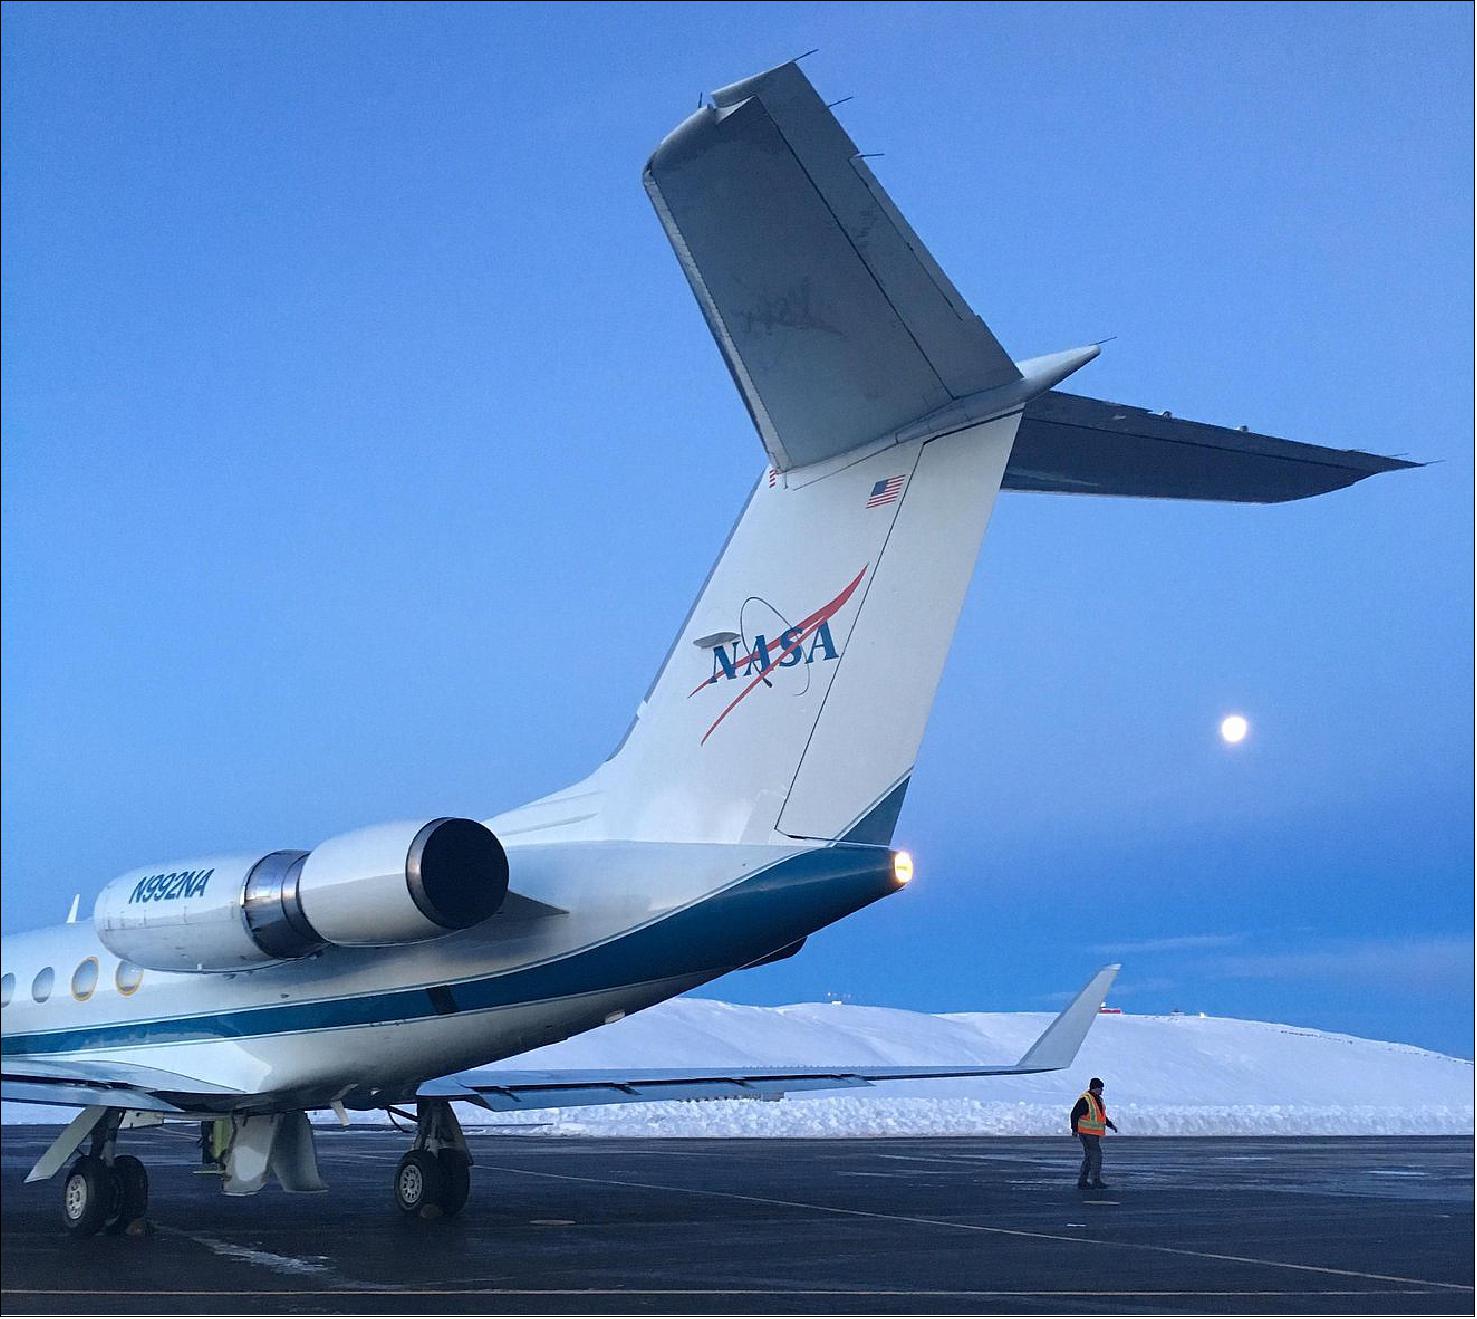 Figure 6: NASA's Gulfstream III was one of several research aircraft that OMG used during the mission's six-year field campaign to record the temperature, salinity, and depth of the ocean around the entire island. OMG used airports in Greenland, Iceland, and Norway as bases for research flights. This image was taken at Thule Air Base, Greenland, on Sept. 18, 2016 (image credit: NASA/JPL-Caltech)